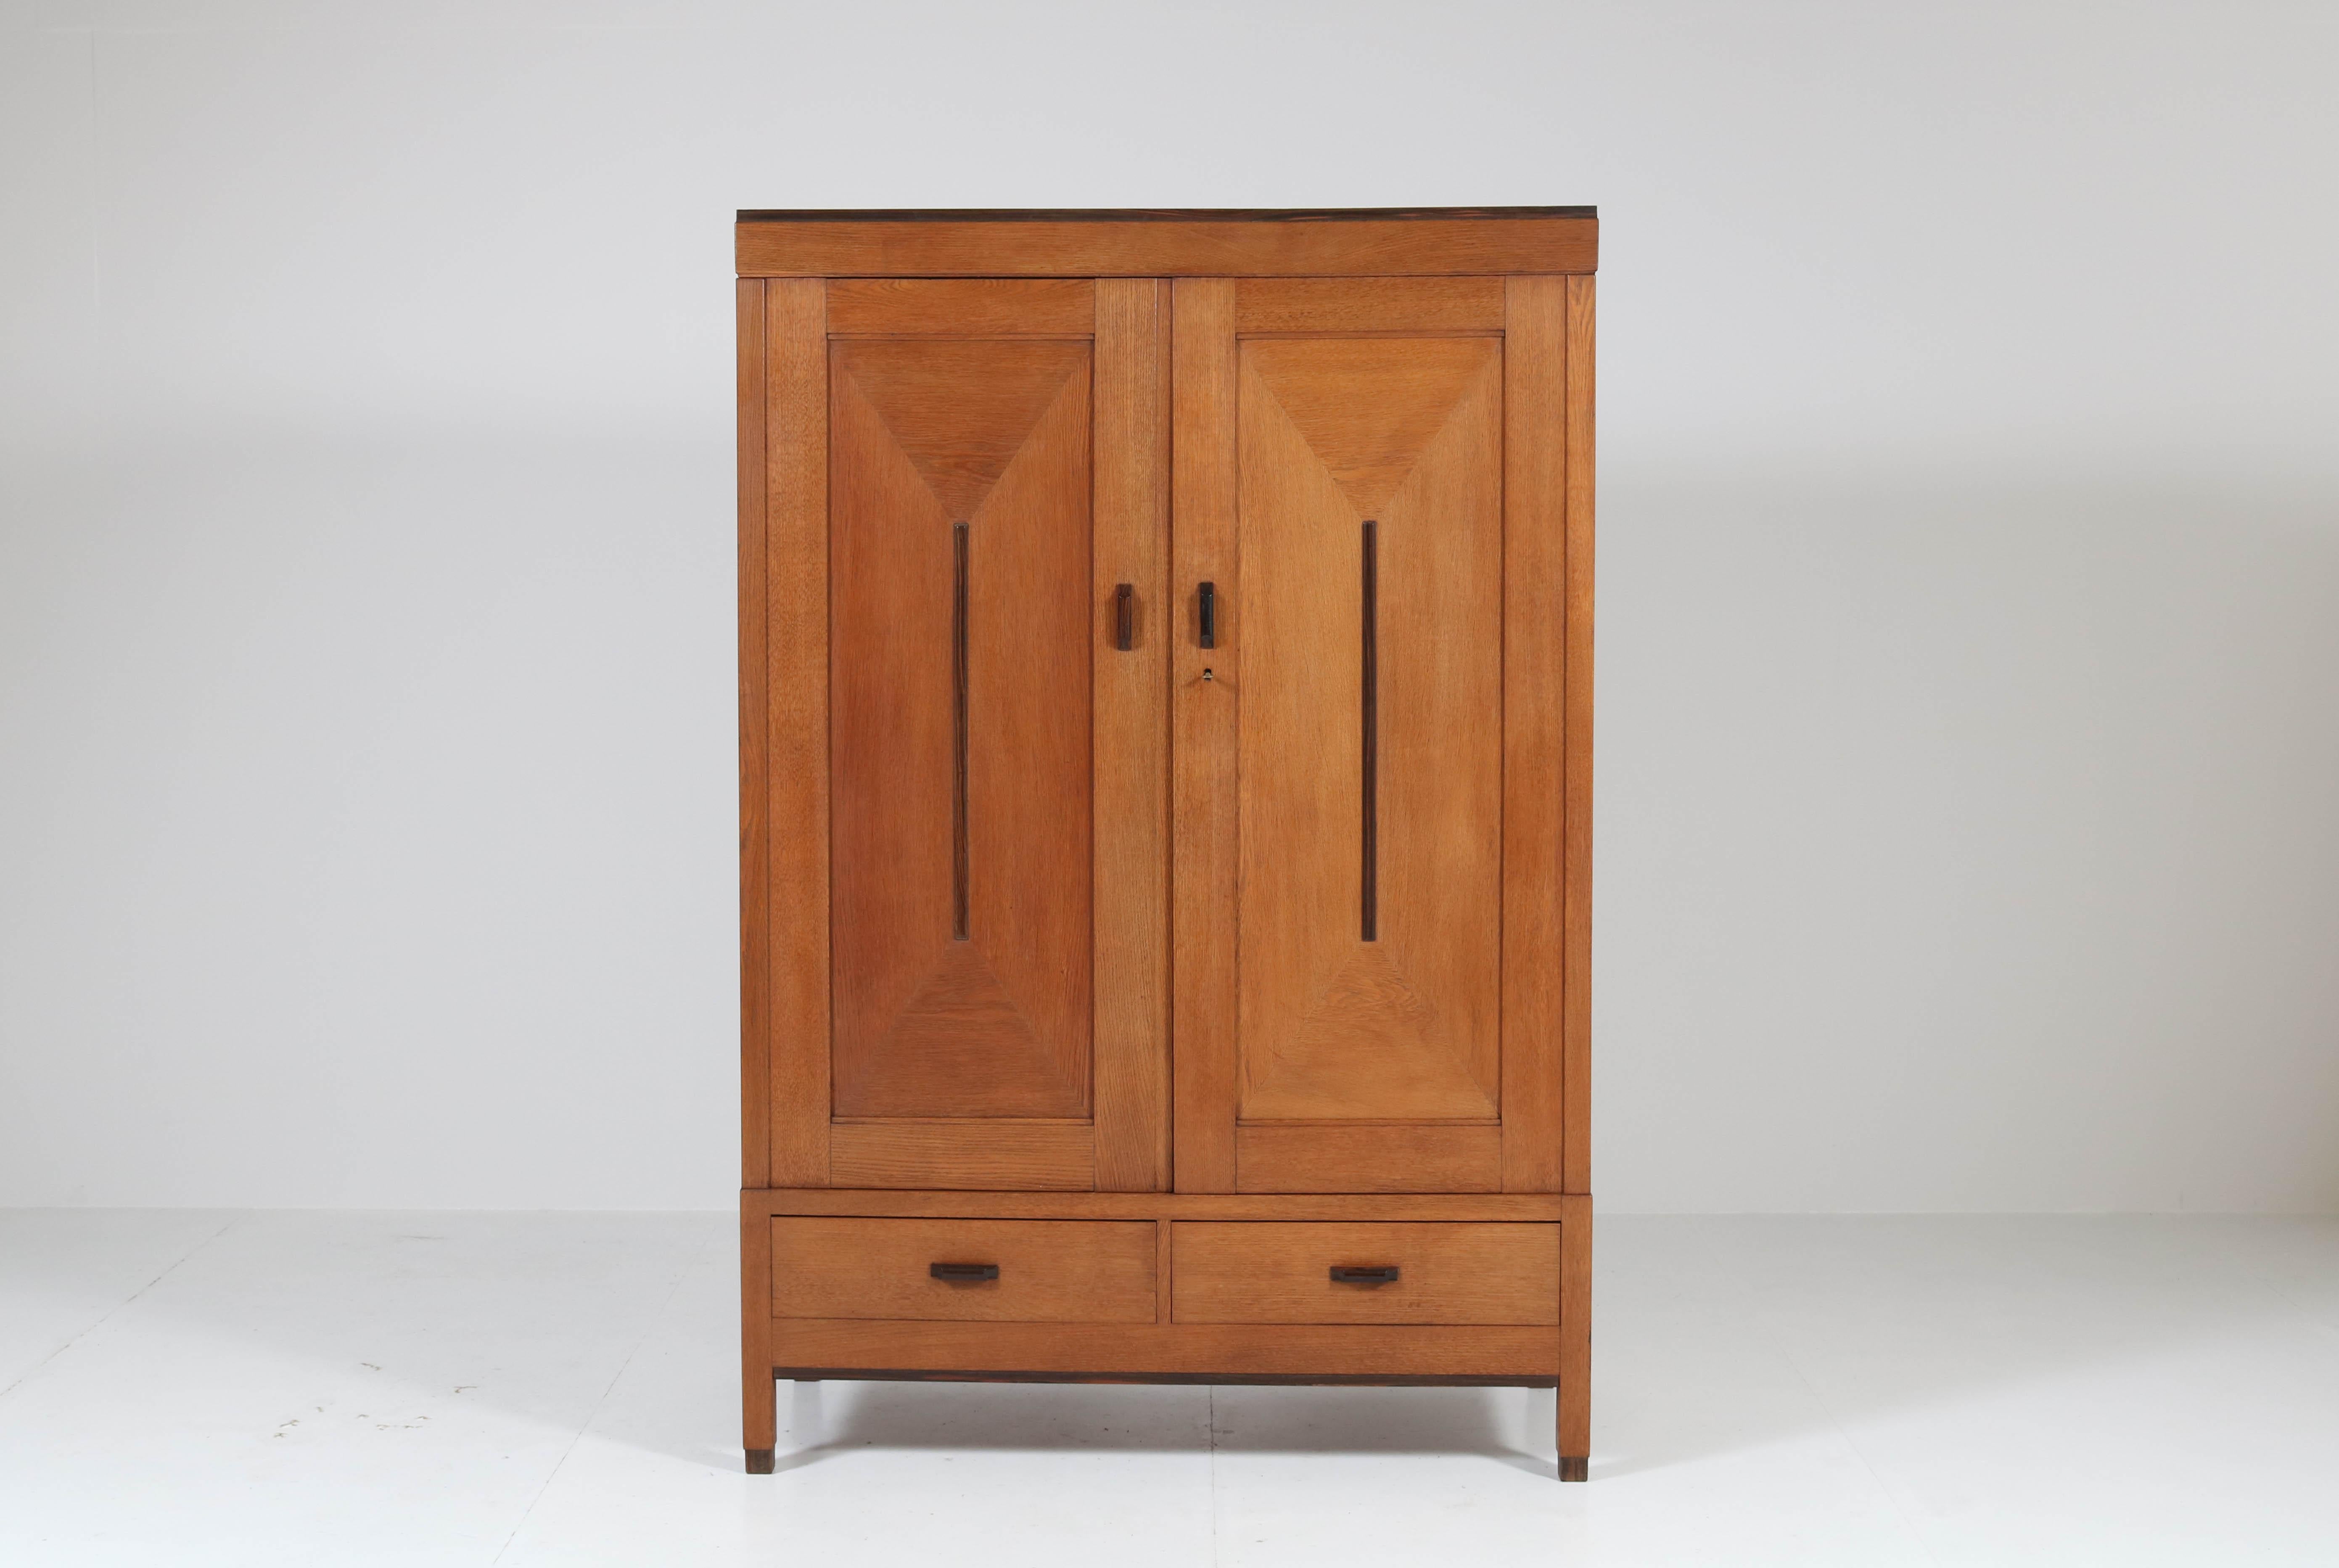 Offered by Amsterdam Modernism:
Stunning Art Deco Haagse school armoir or wardrobe.
Striking Dutch design from the 1920.
Solid oak with solid ebony Macassar handles on doors and drawers.
Both doors have oak veneer with solid ebony Macassar